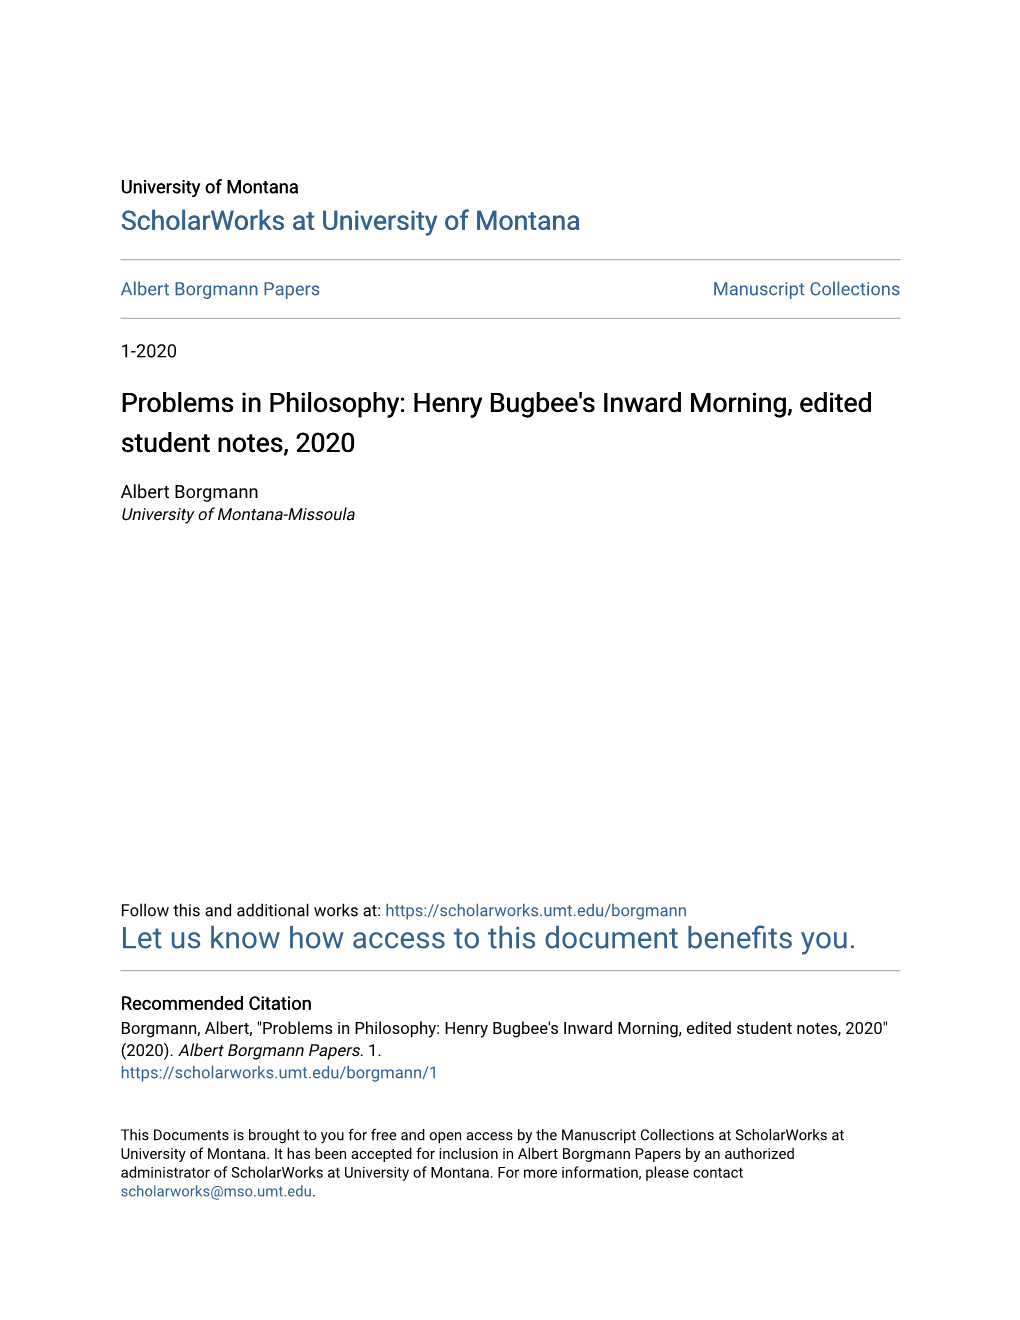 Problems in Philosophy: Henry Bugbee's Inward Morning, Edited Student Notes, 2020